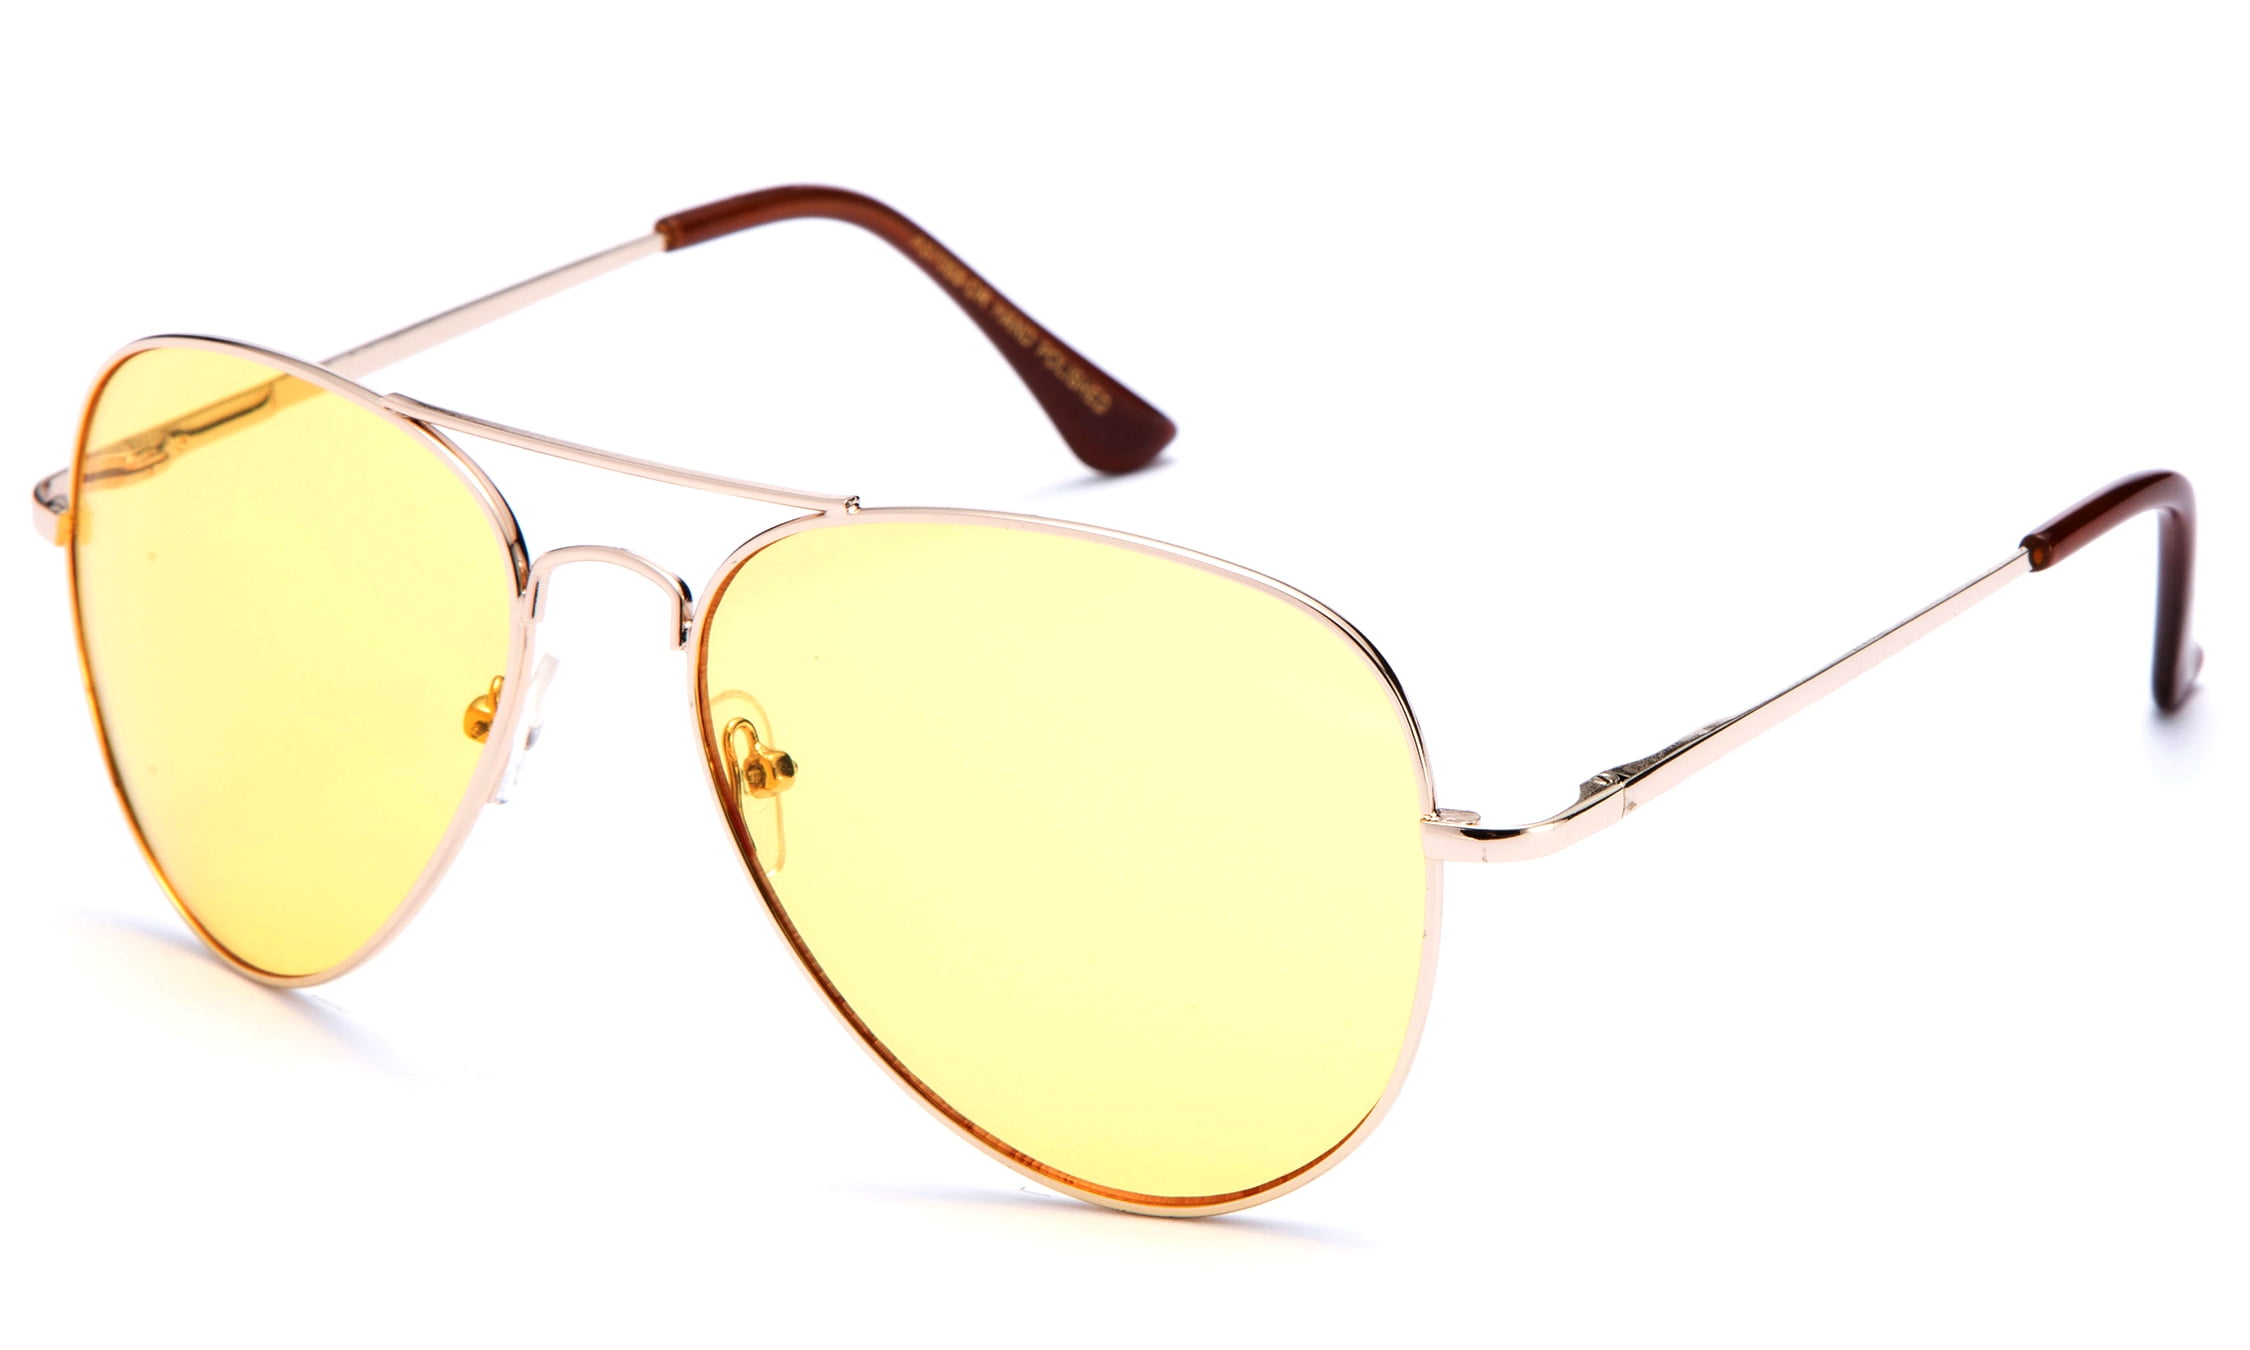 Stylish White Transparent, Stylish Personality Of Yellow Sunglasses, Yellow,  Transparent, Exposed To The Sun PNG Image For Free Download